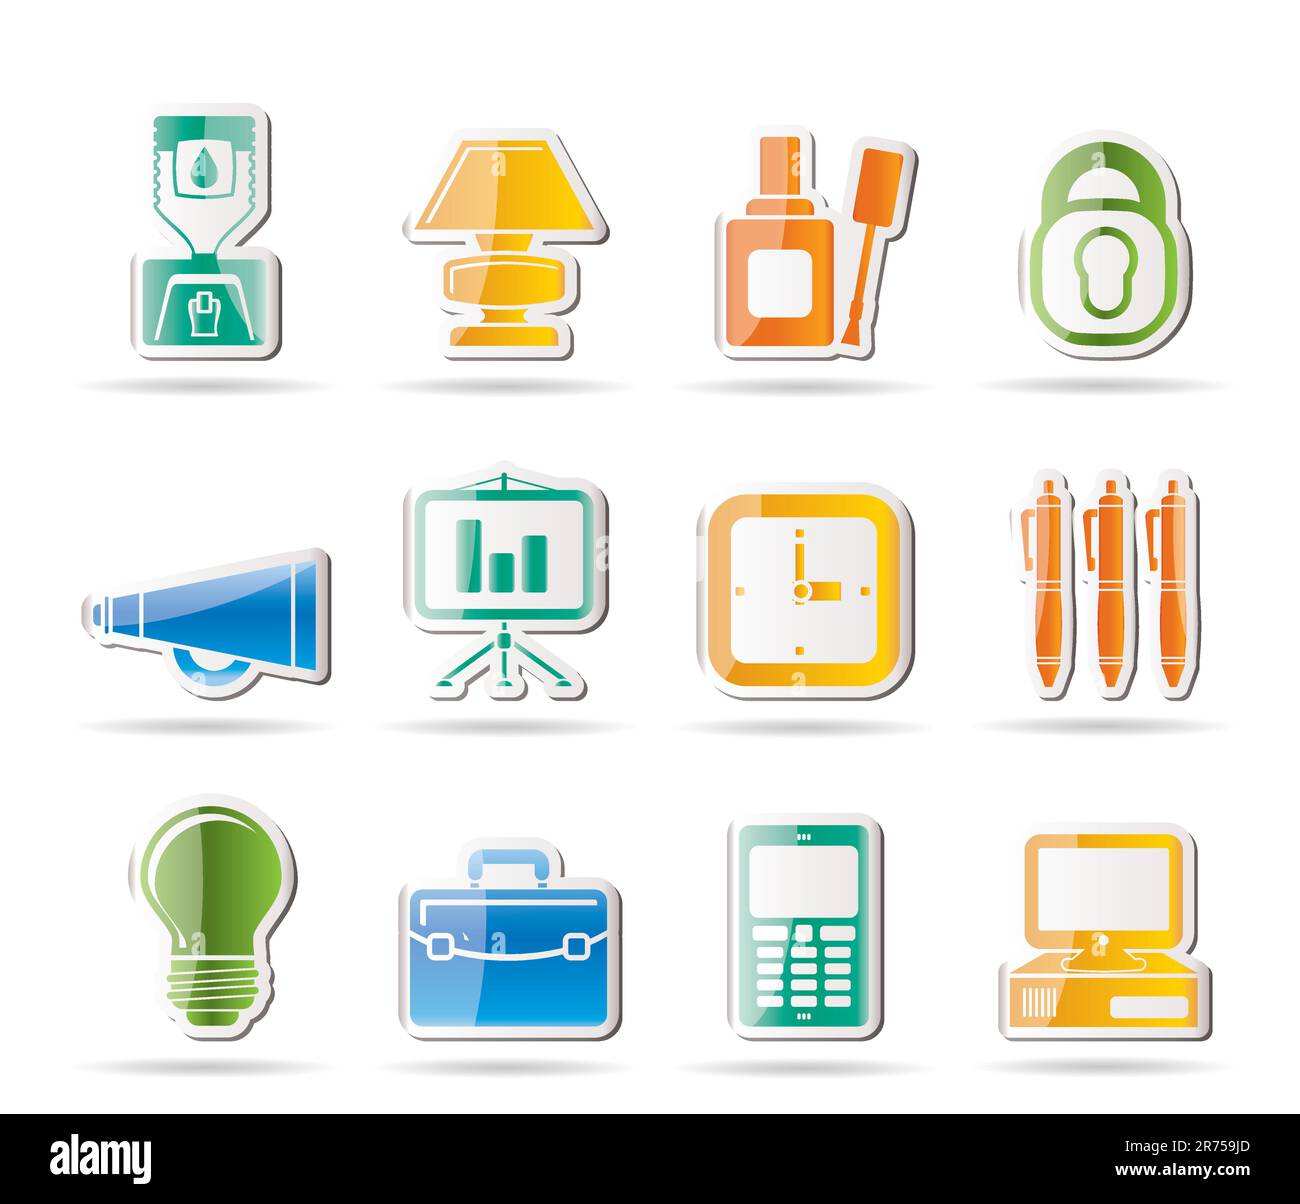 Business and office icons - vector icon set Stock Vector